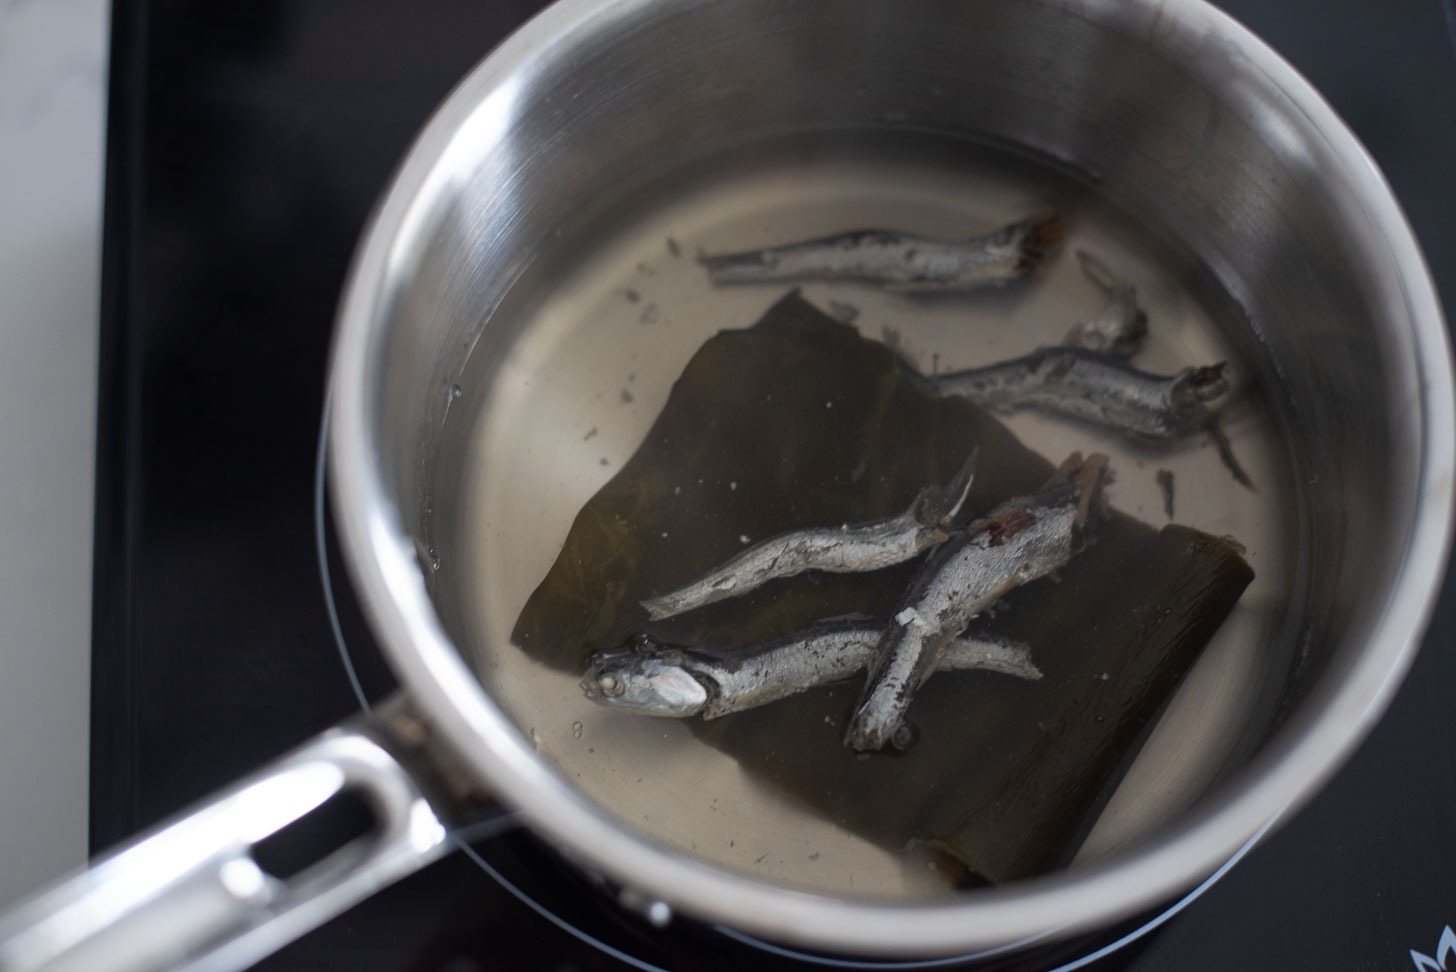 A pot of anchovy and sea kelp stock for making braised tofu